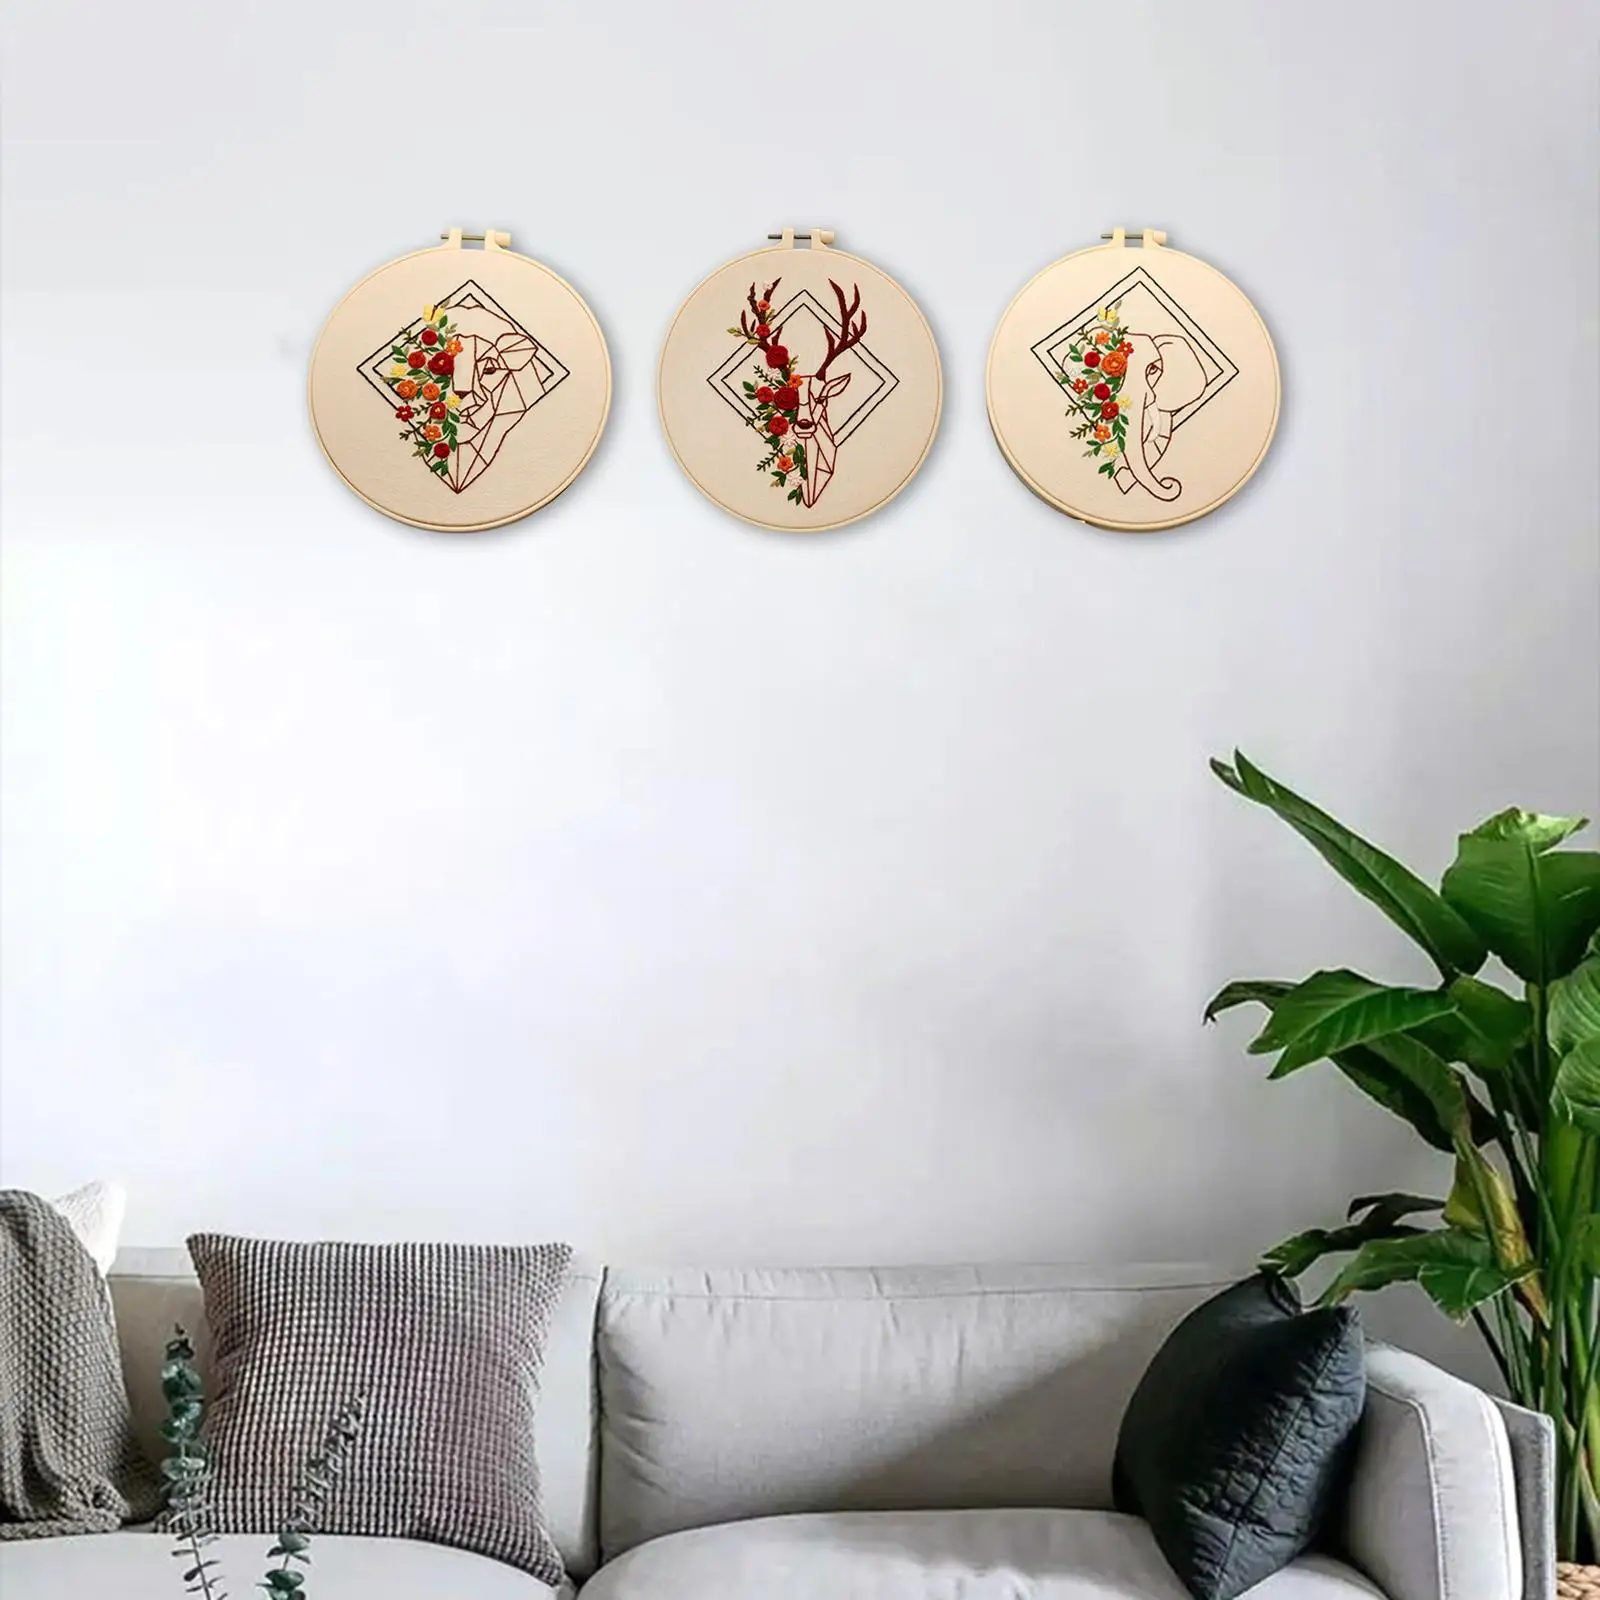 3 Piece Embroidery Starter Handcrafted Projects with Embroidery Hoop DIY